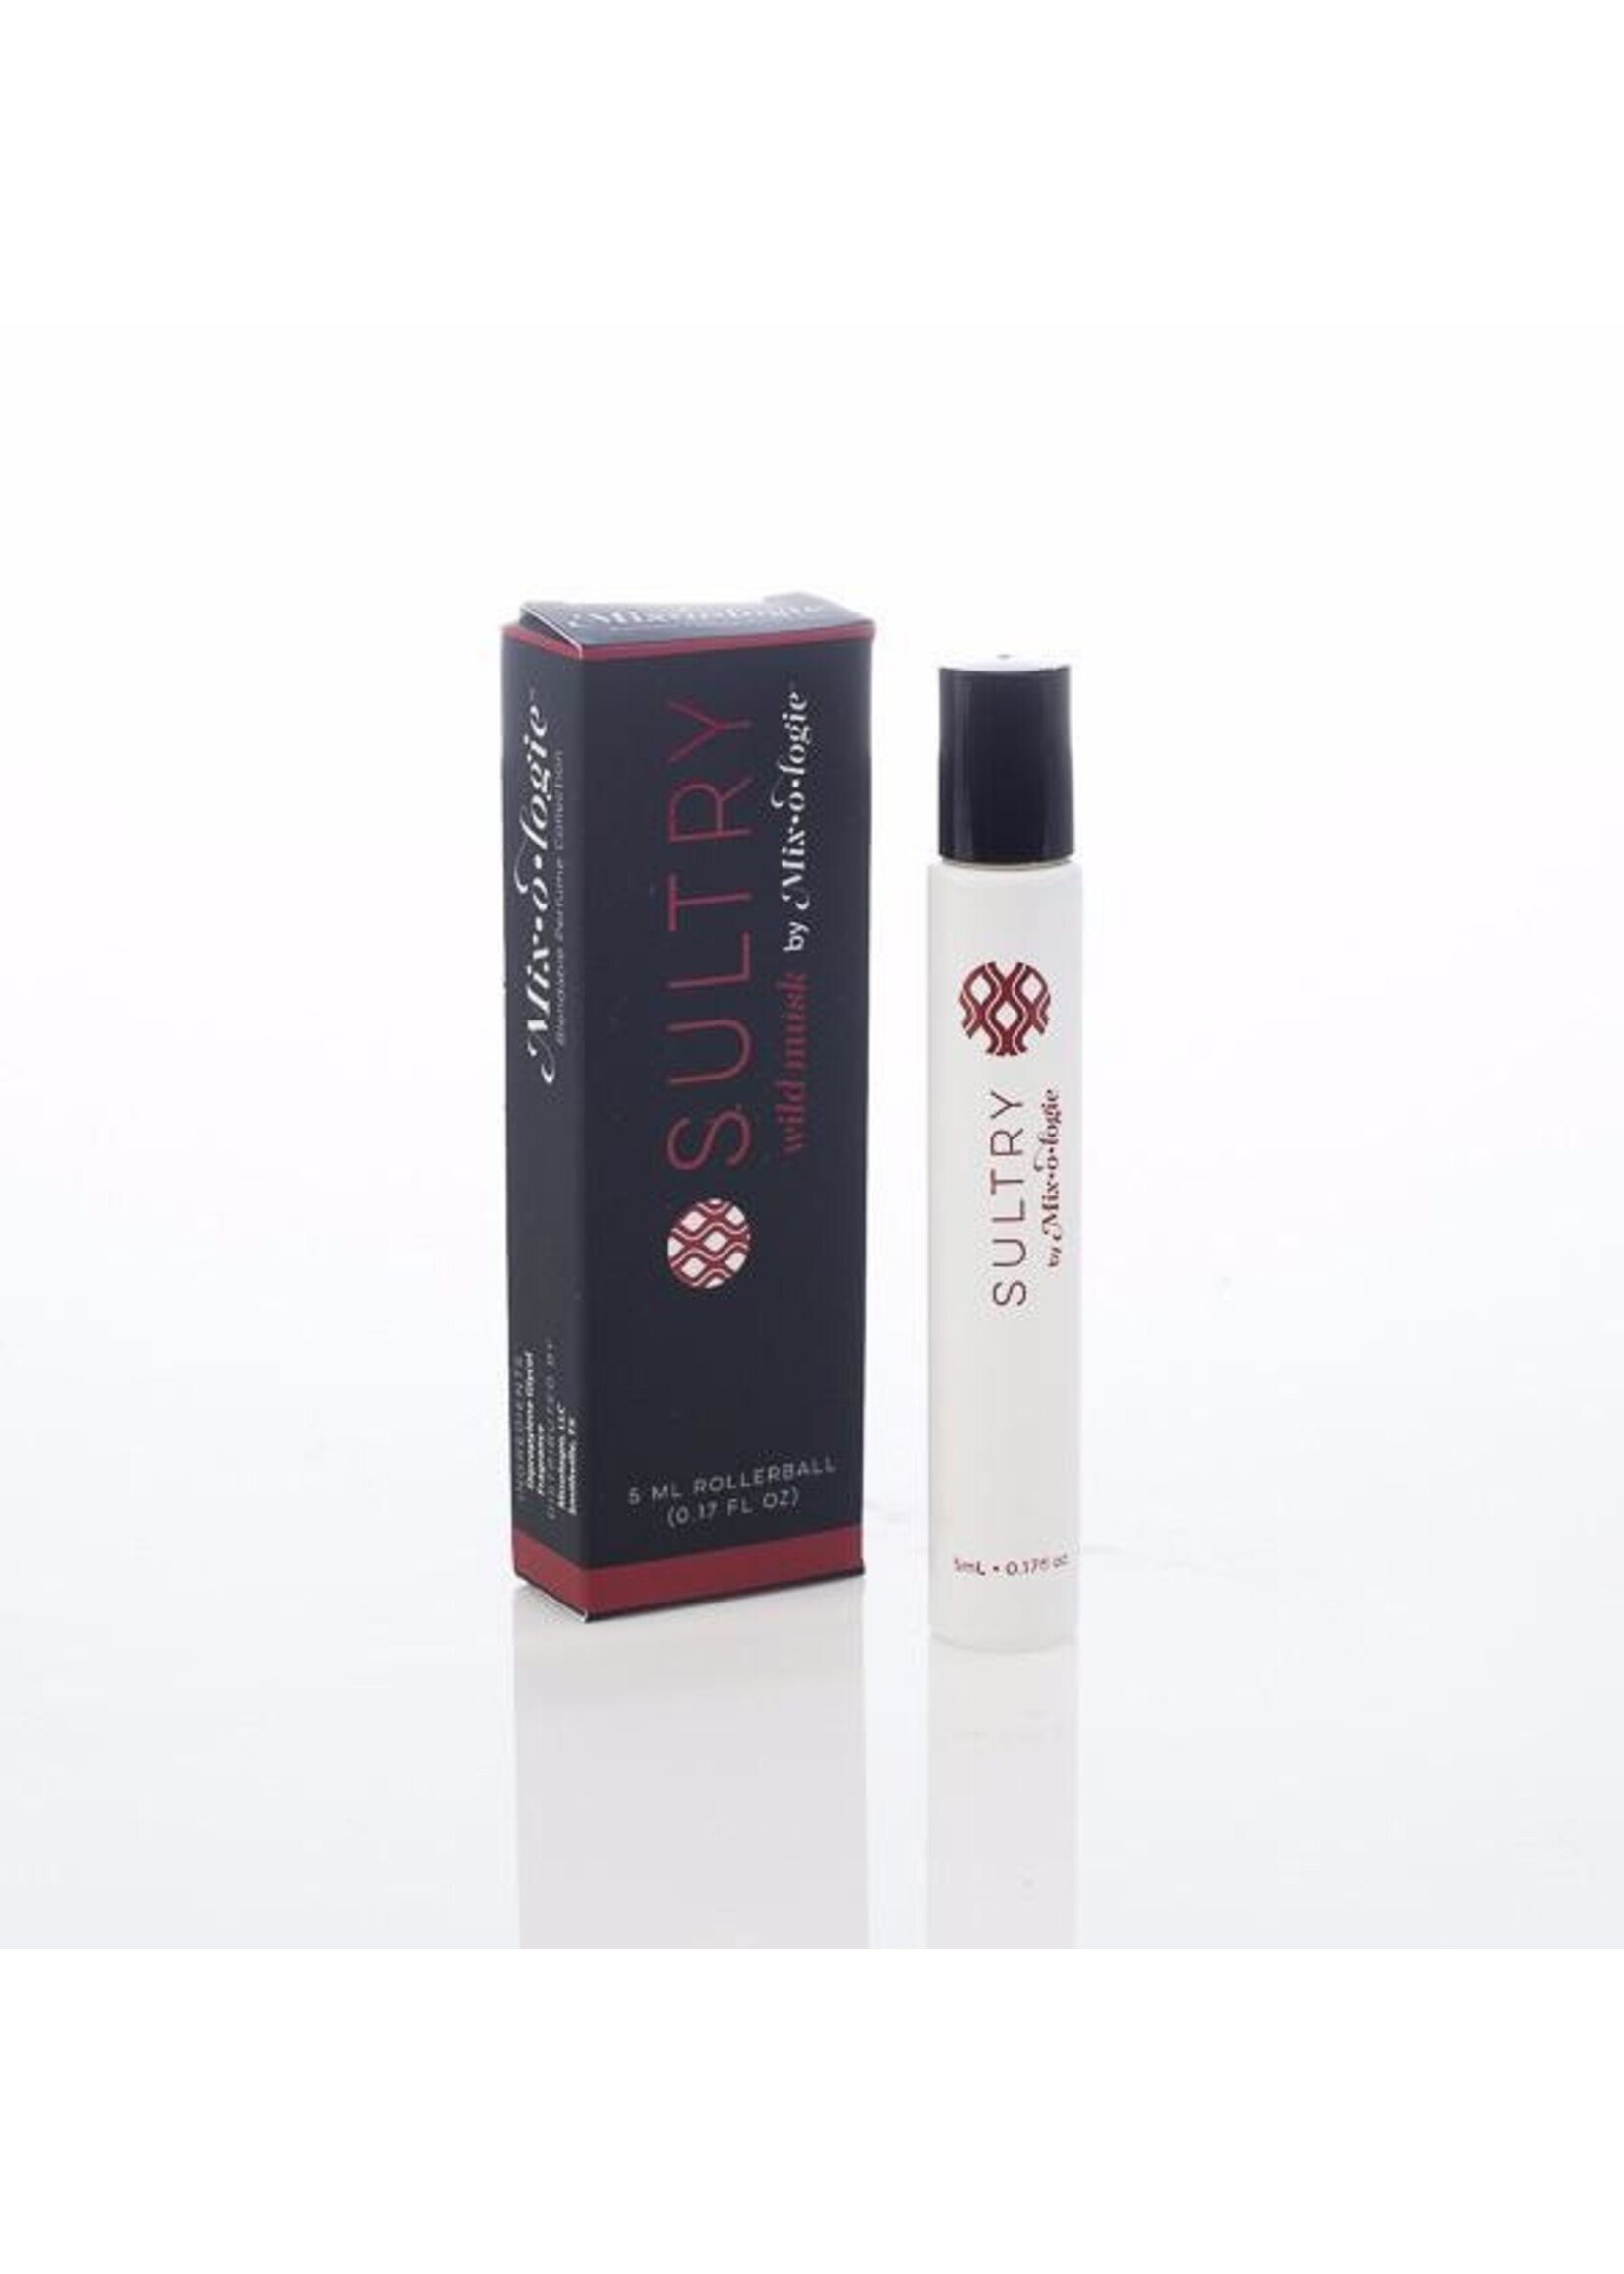 MIXOLOGIE MIX PERFUME ROLLERBALL SULTRY